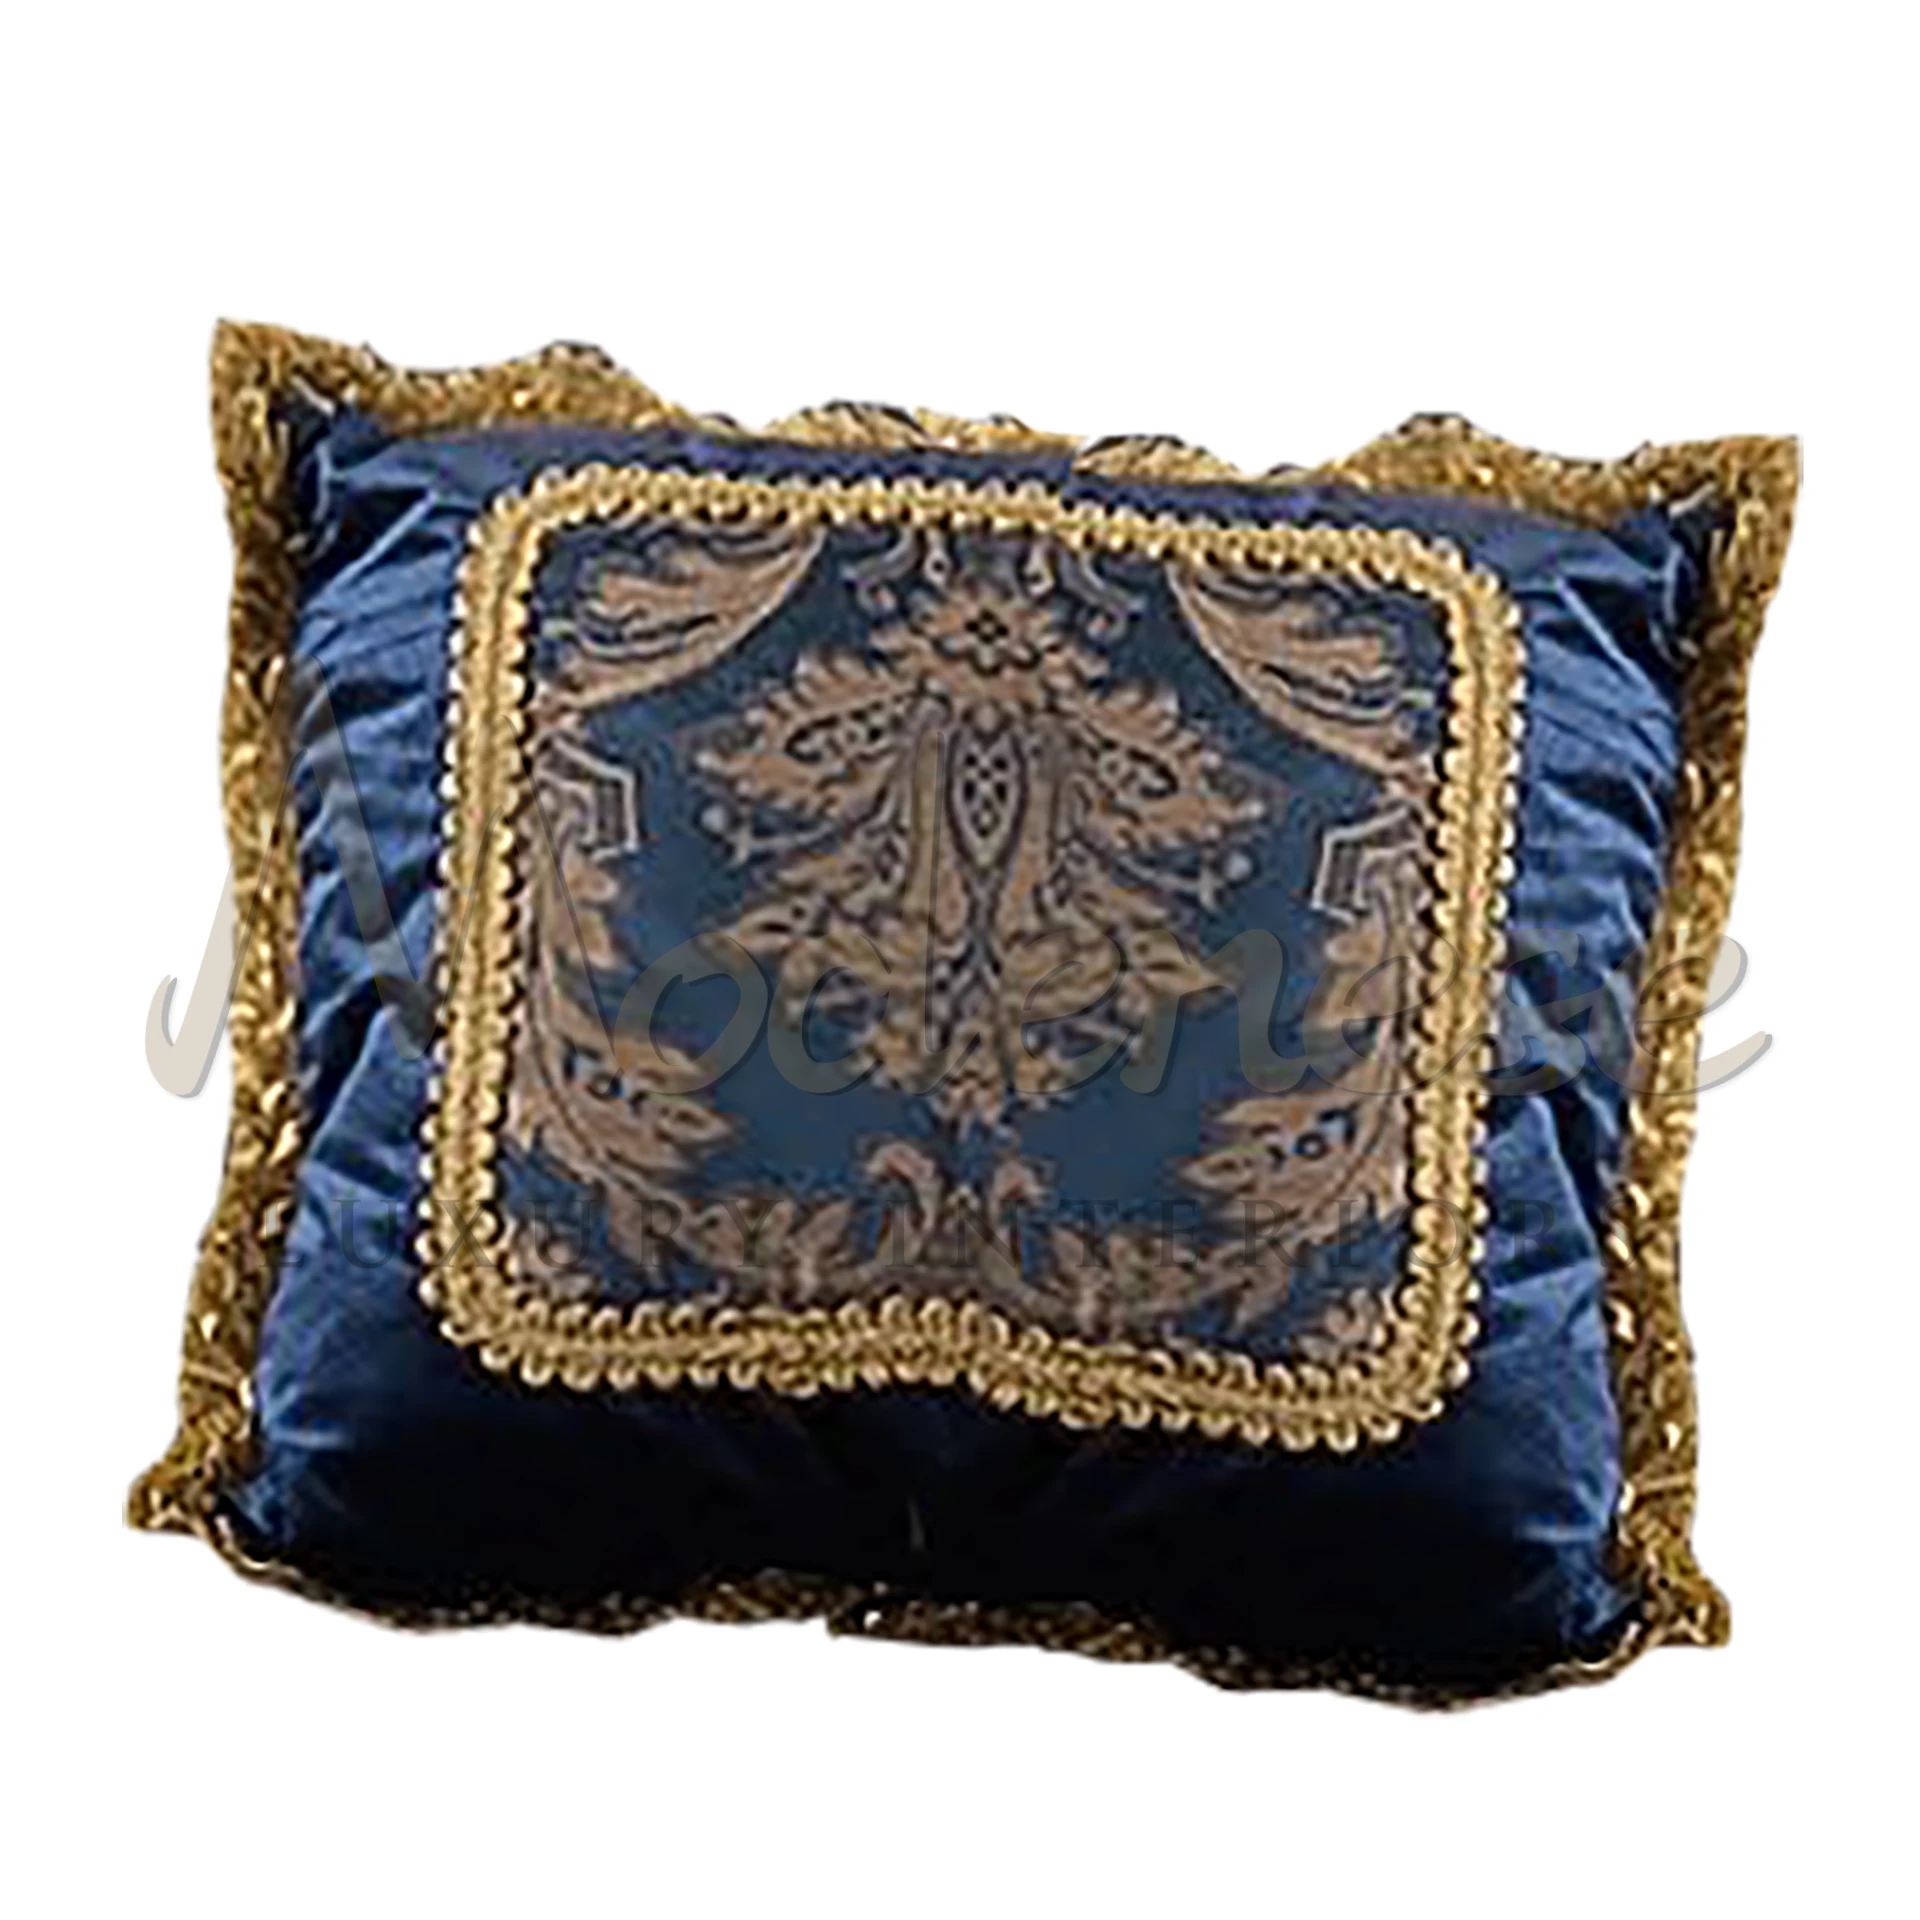 Imperial Blue Pillow in deep shades of royal blue, sapphire, and indigo, showcasing Italian luxury and textile craftsmanship.